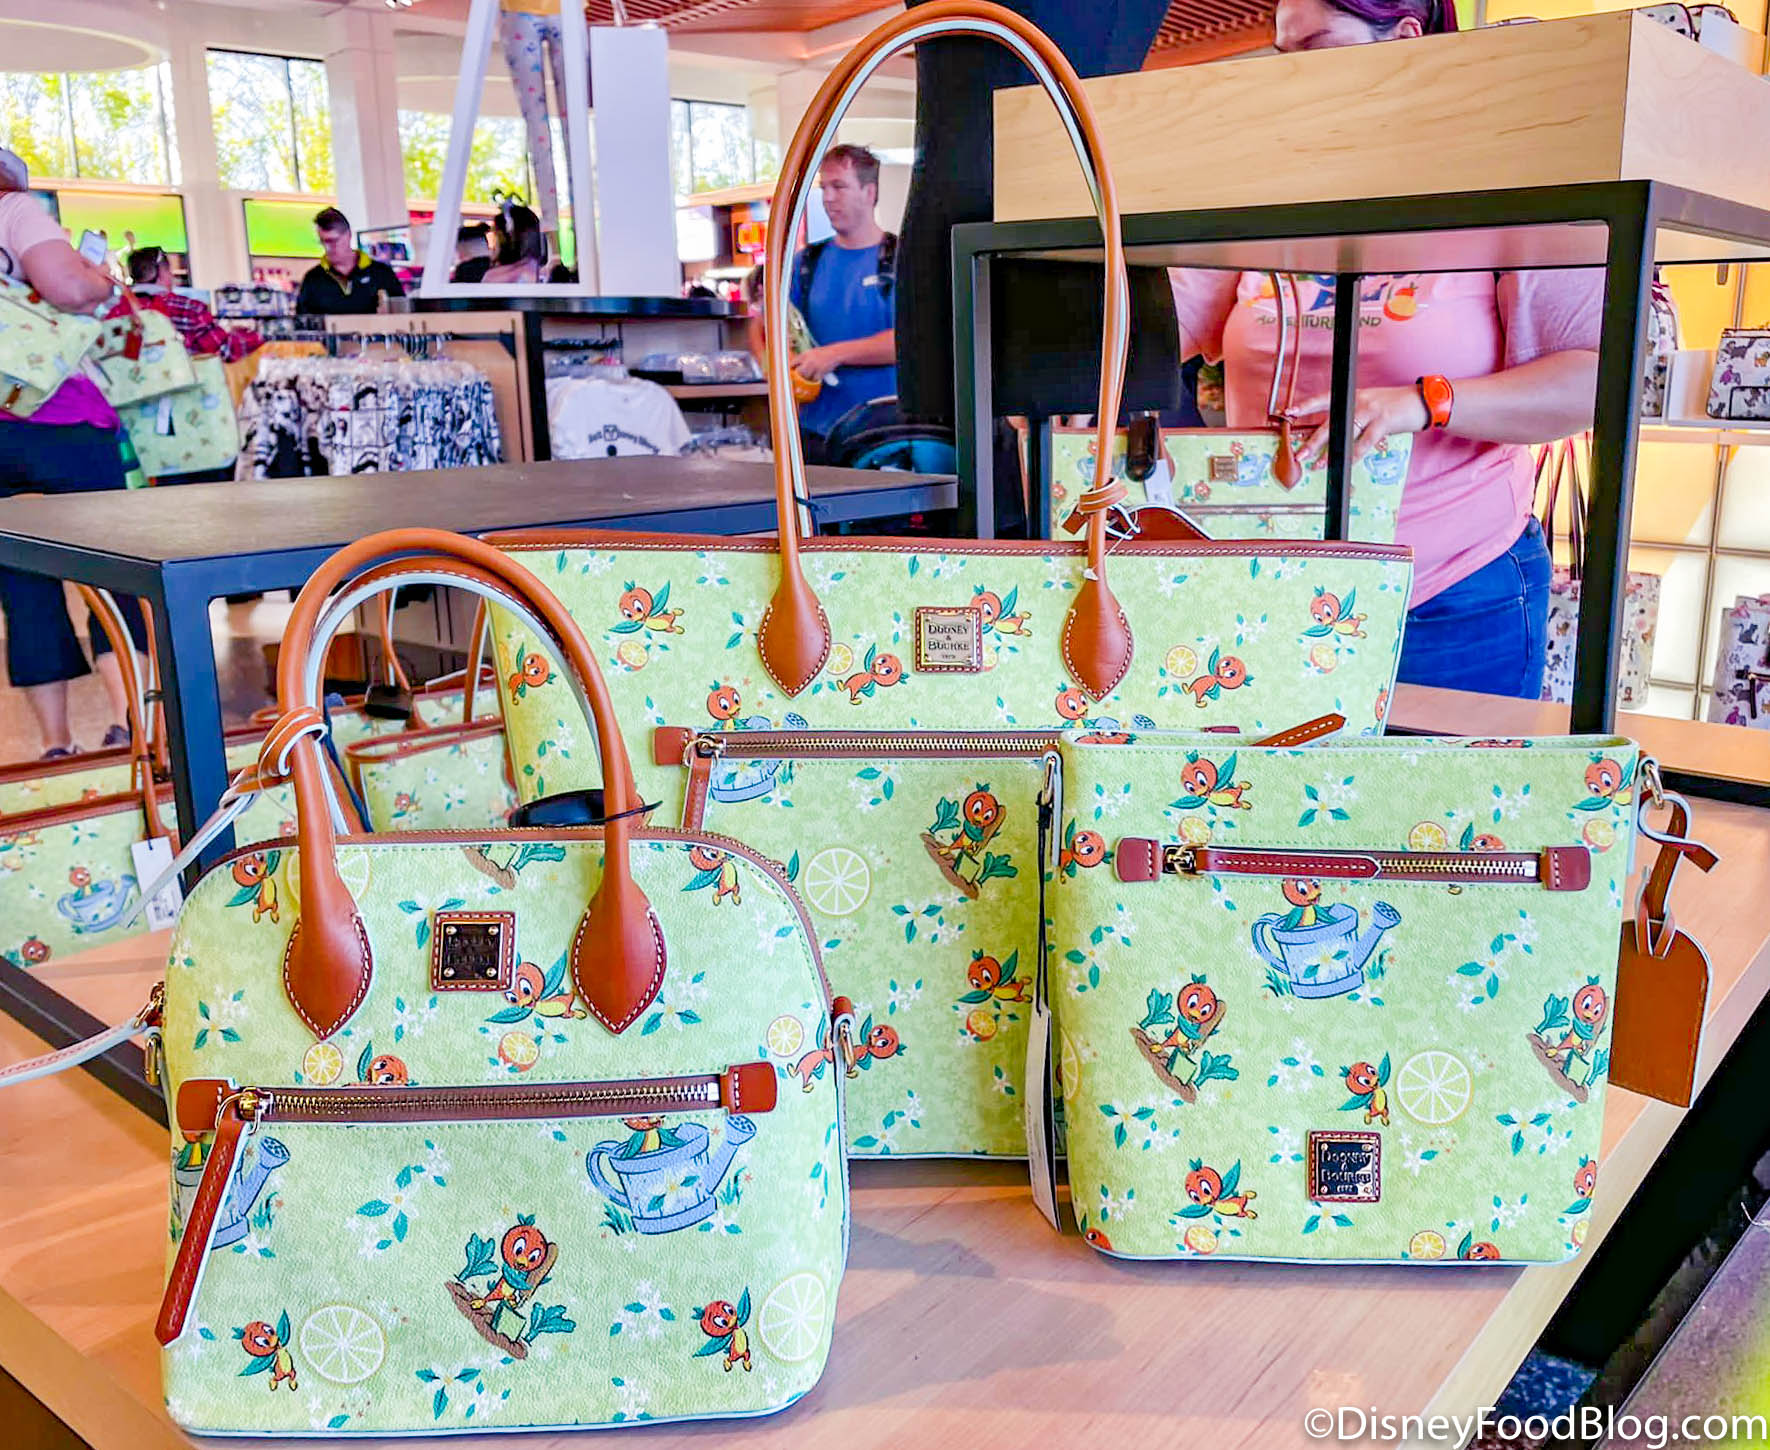 PHOTOS: NEW Dooney & Bourke it's a small world Collection Sailing Into  Walt Disney World on June 14th - WDW News Today